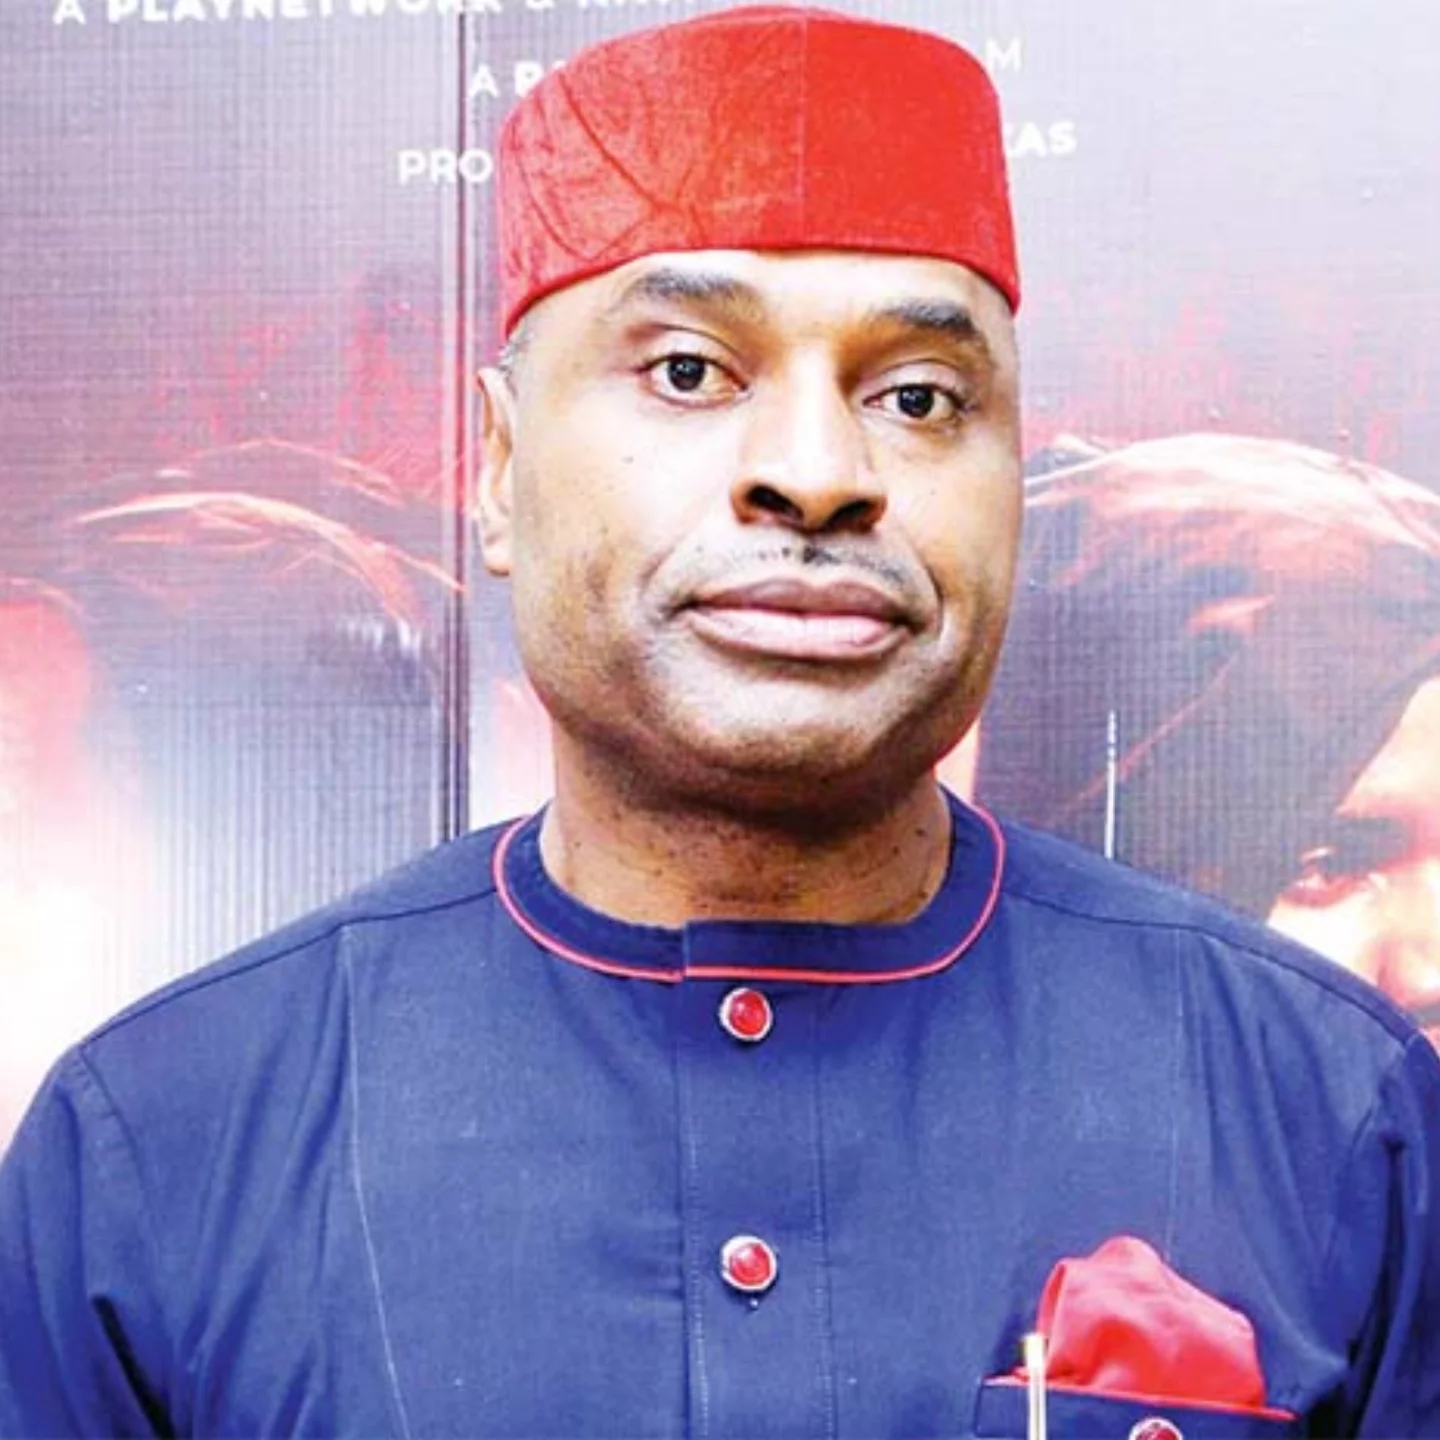 Abure worker of iniquity, LP executive secret society – Kenneth Okonkwo alleges